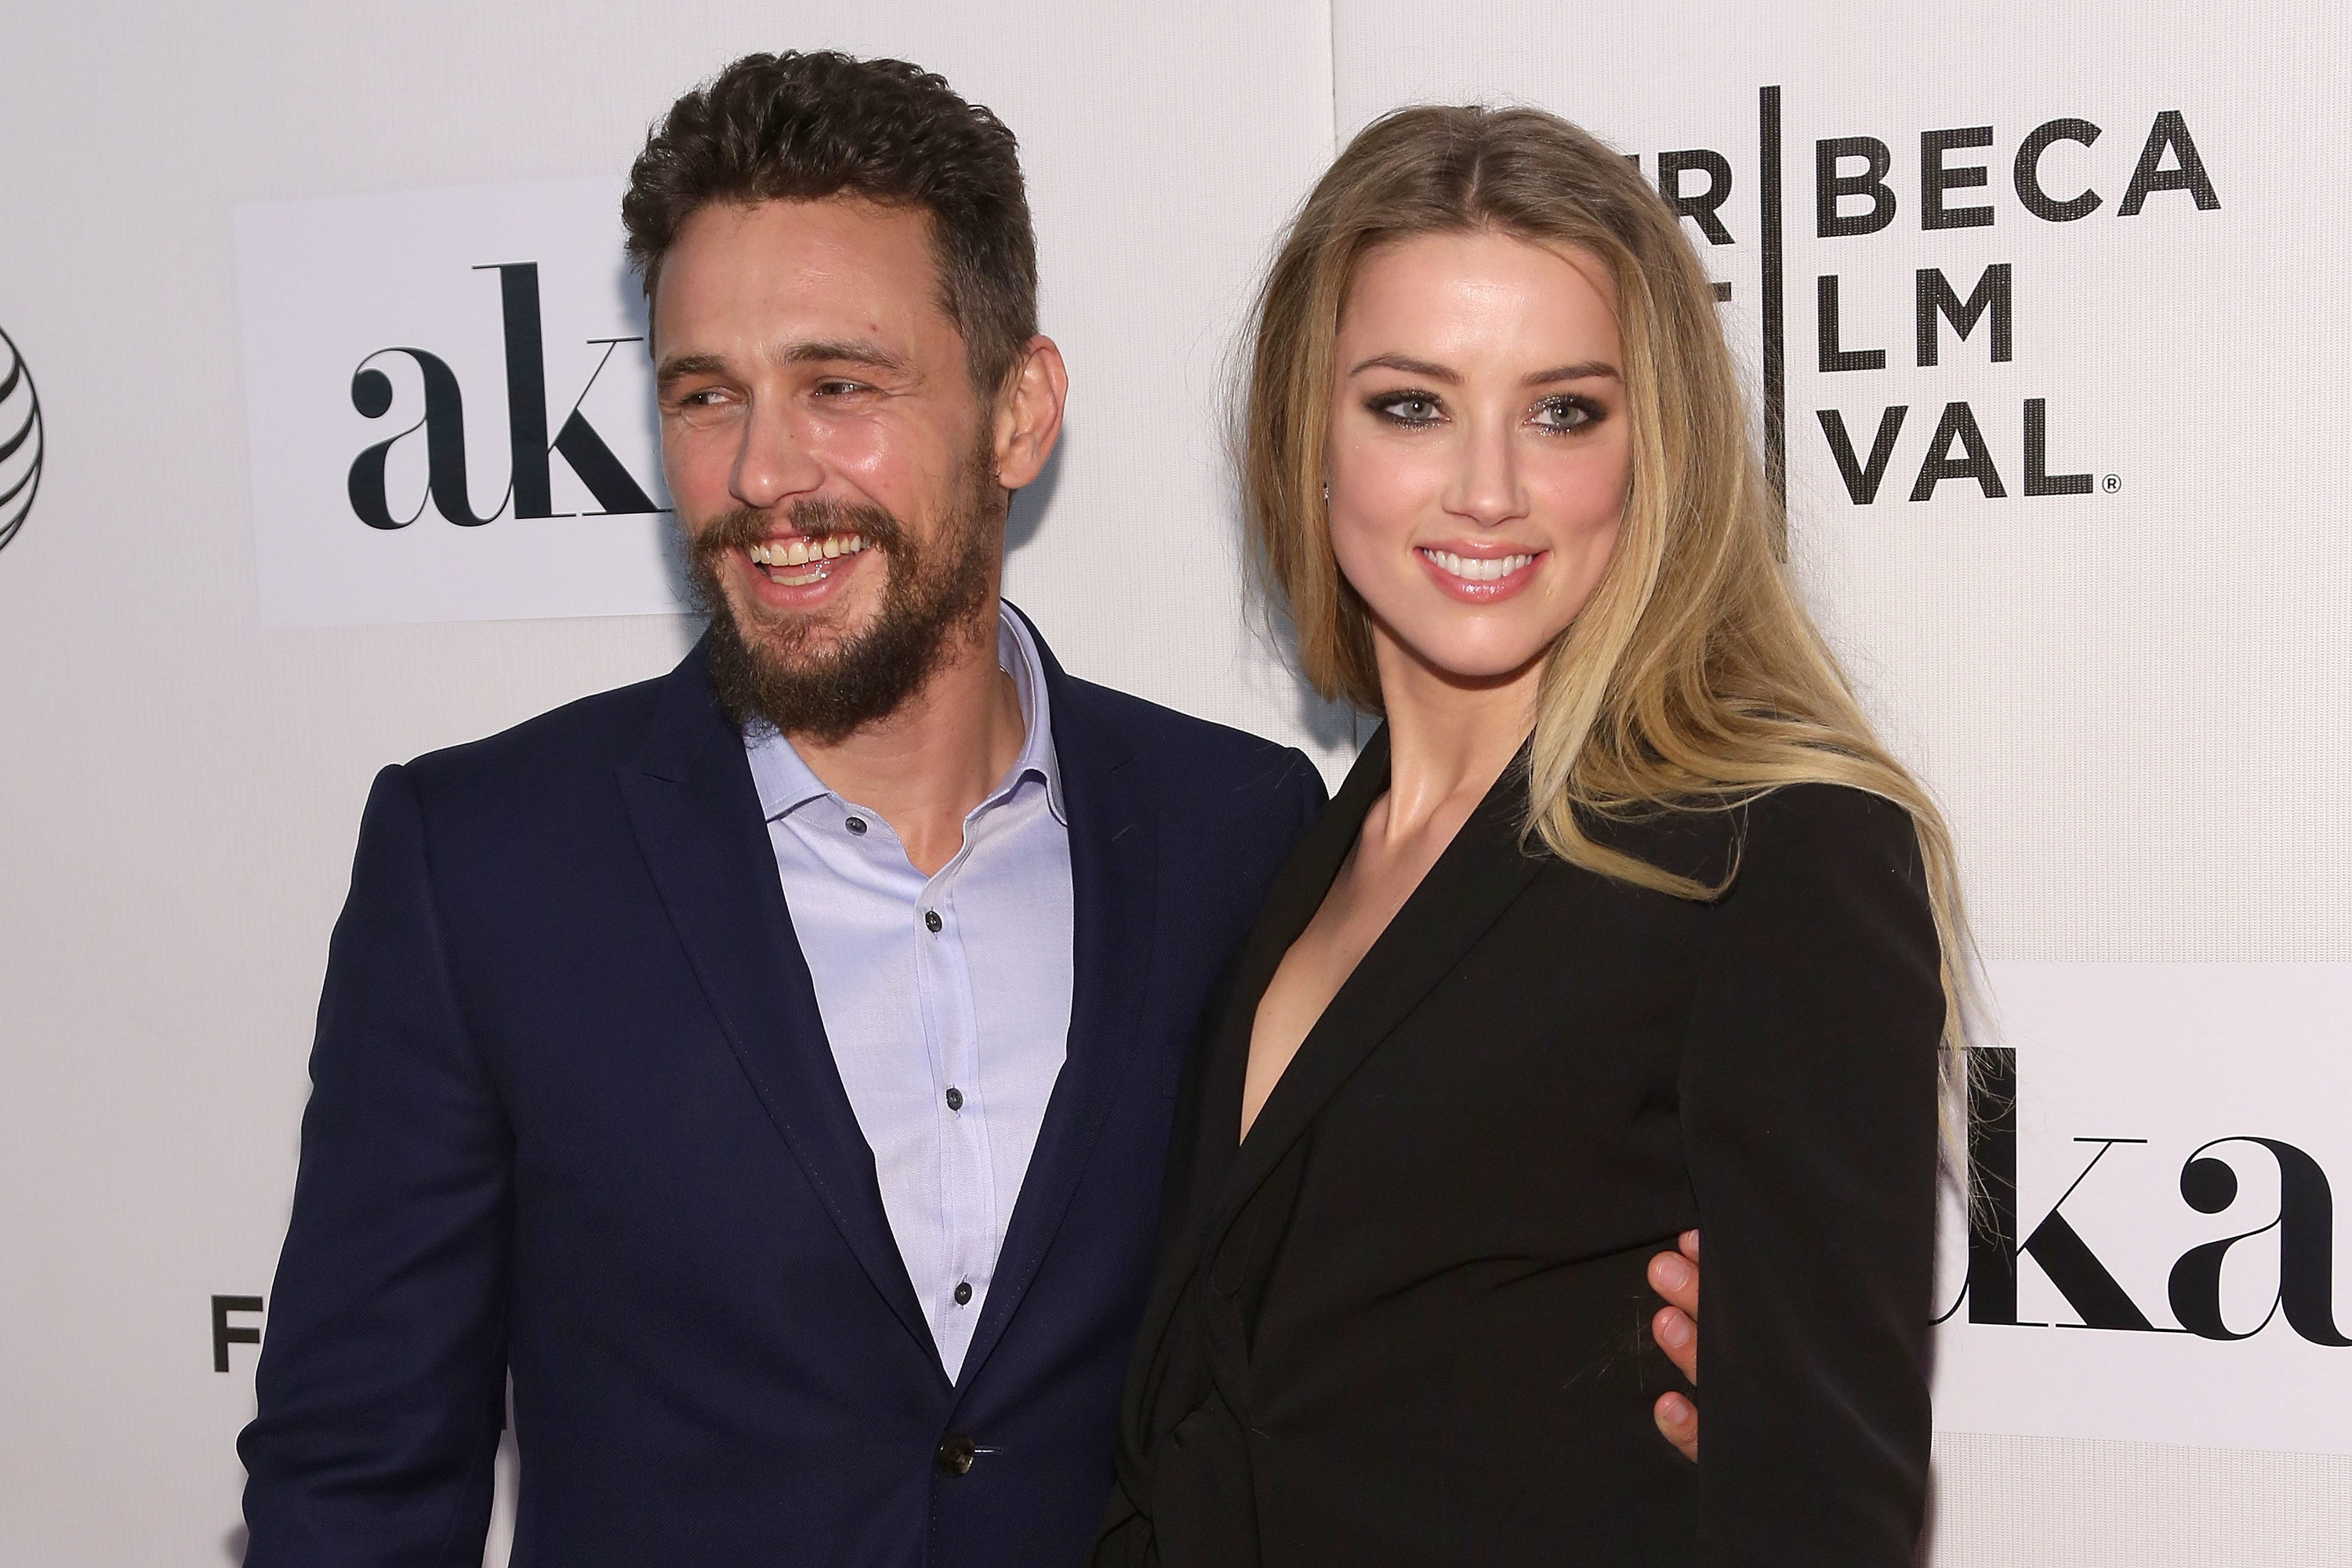 James Franco and Amber Heard photographed together at the premiere of &quot;The Adderall Diaries&quot; at the 2015 Tribeca Film Festival at BMCC Tribeca PAC on April 16, 2015, in New York City